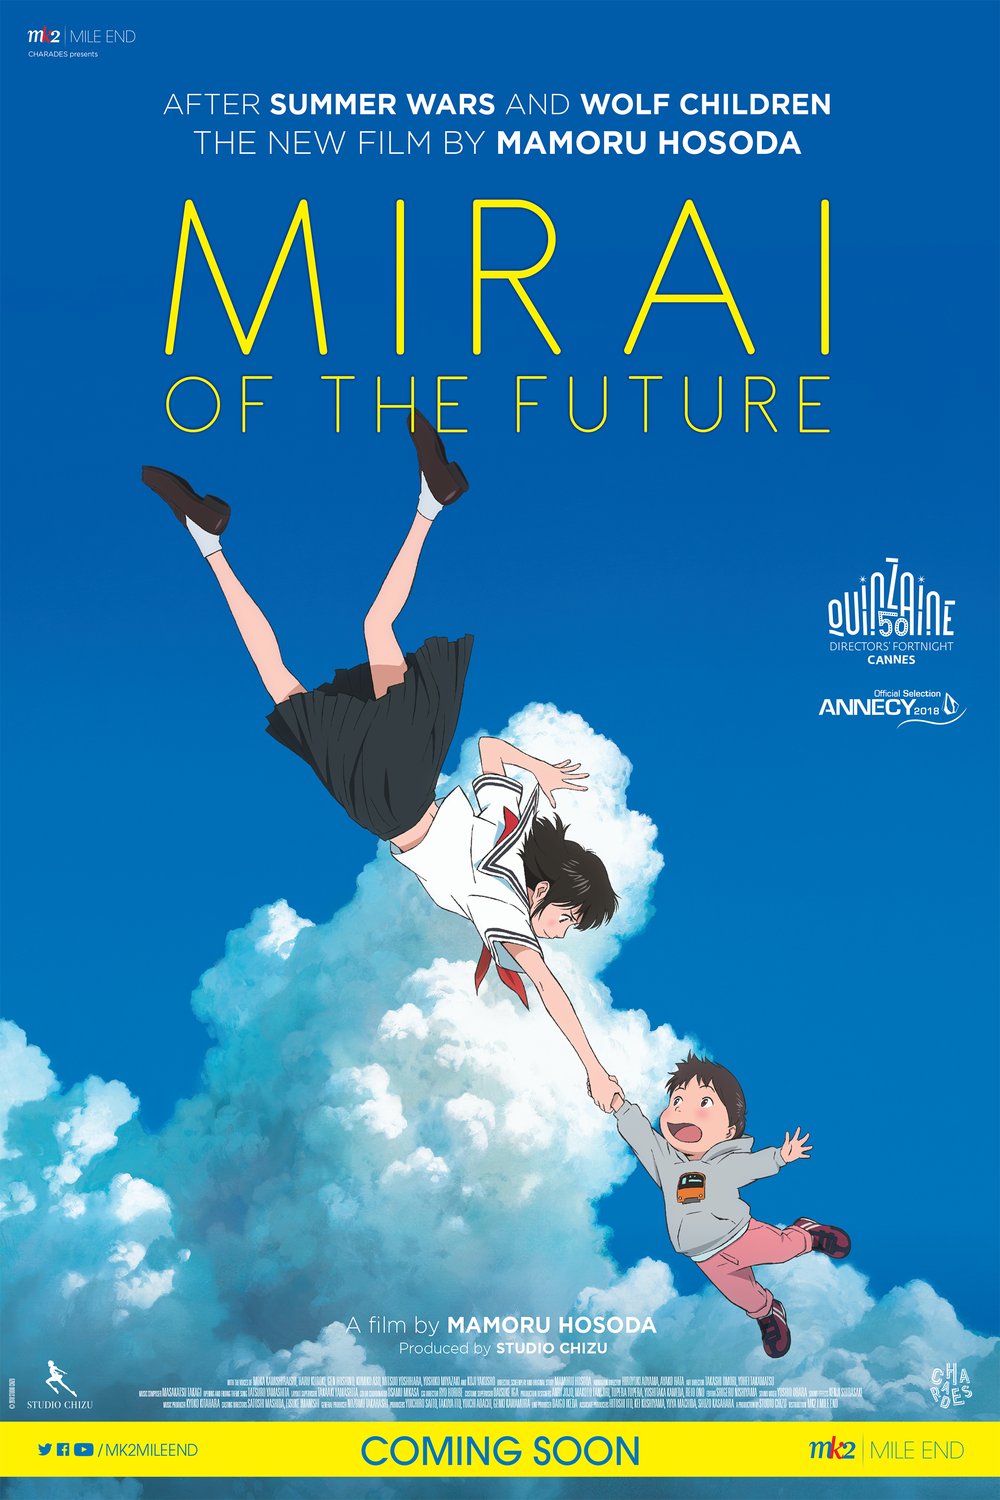 Poster of the movie Mirai of the Future